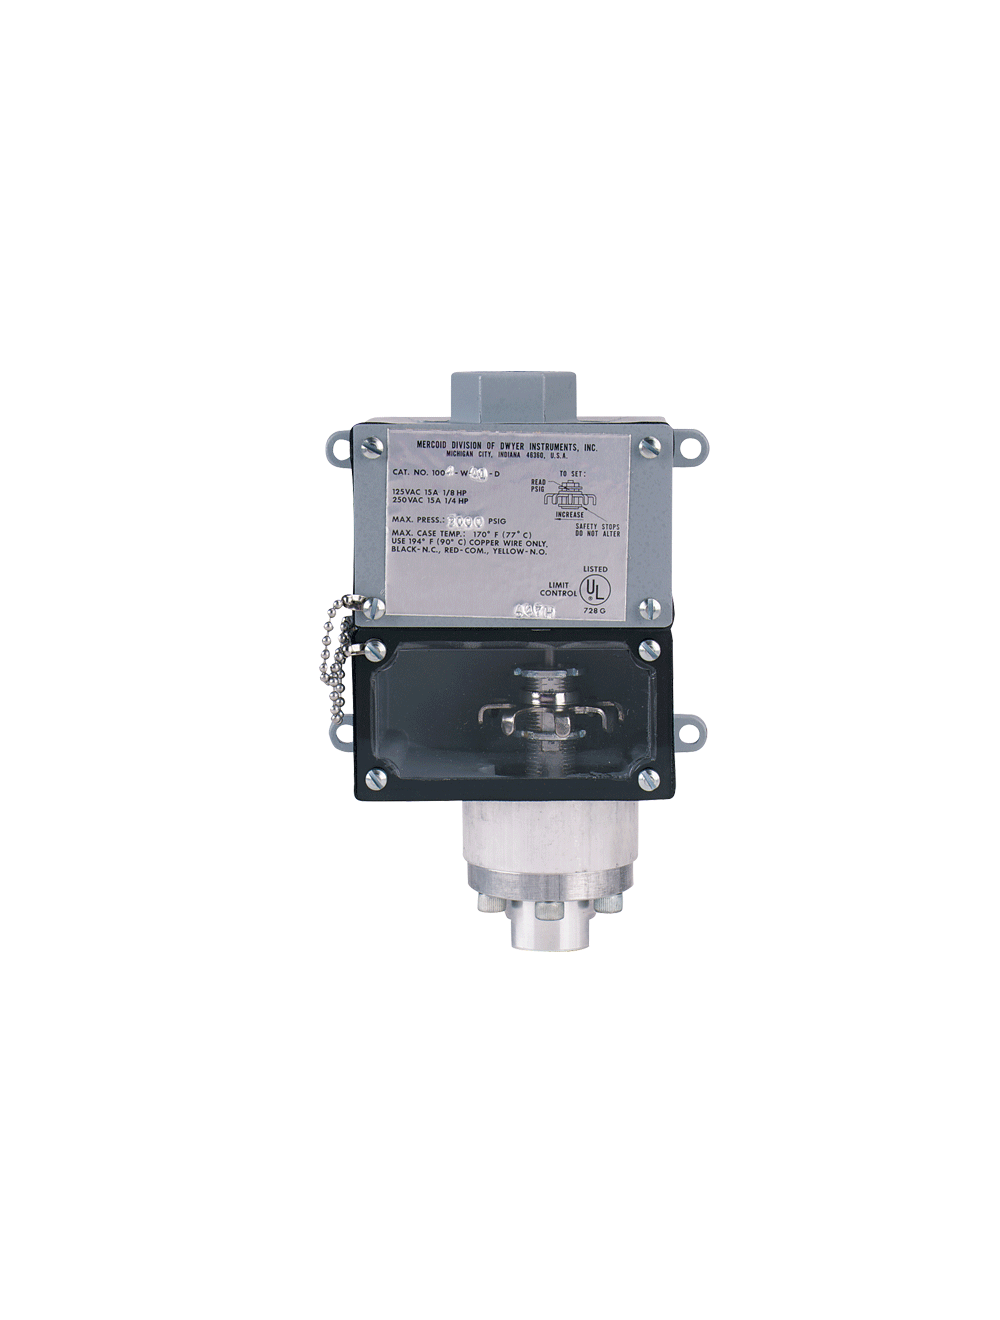 Details about   New Mercoid 9-5104 1/2SA-8T T26E Pressure Switch 